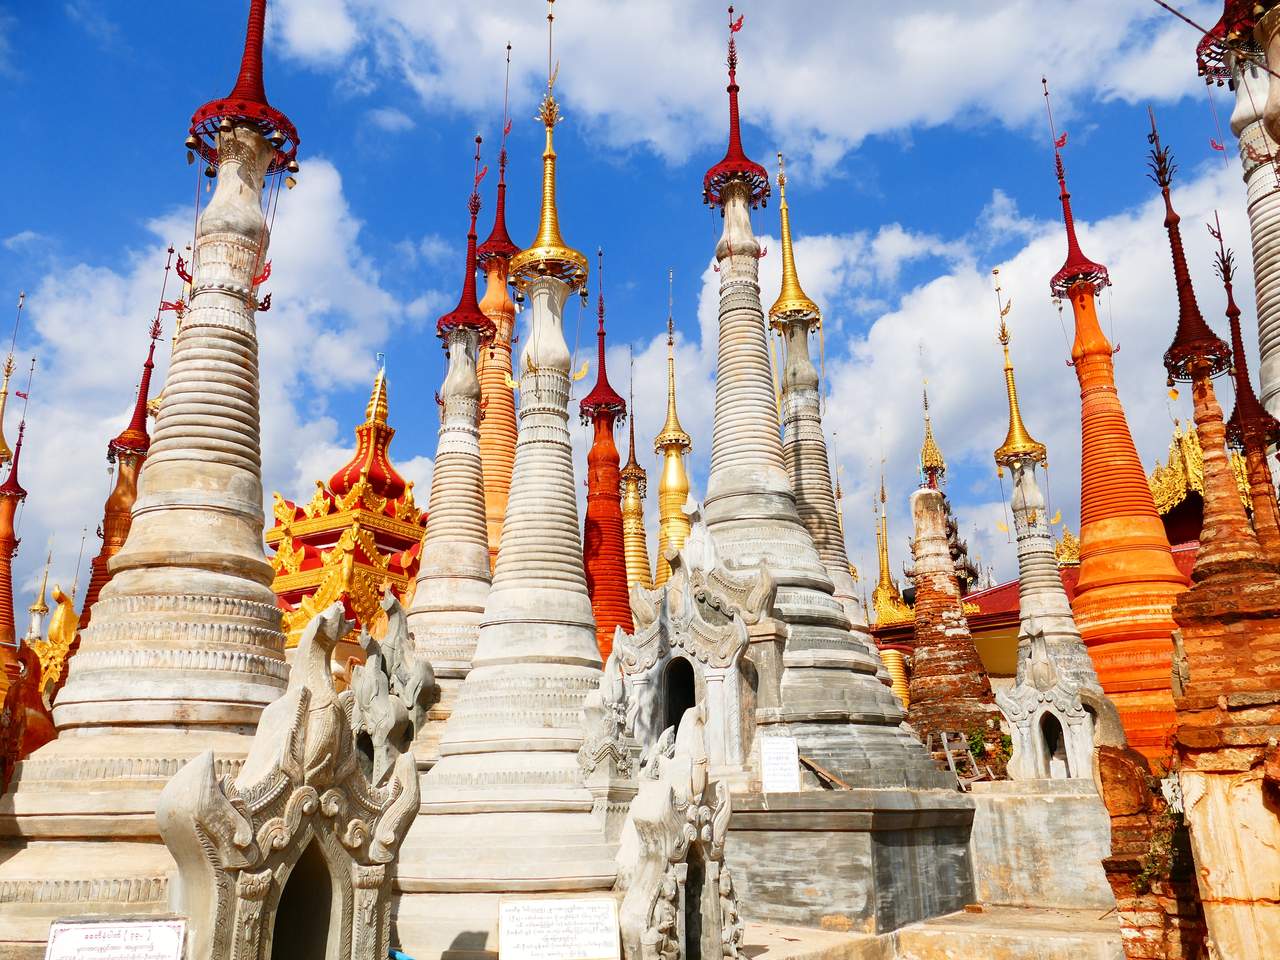 8 things to see and do in Myanmar (Burma)